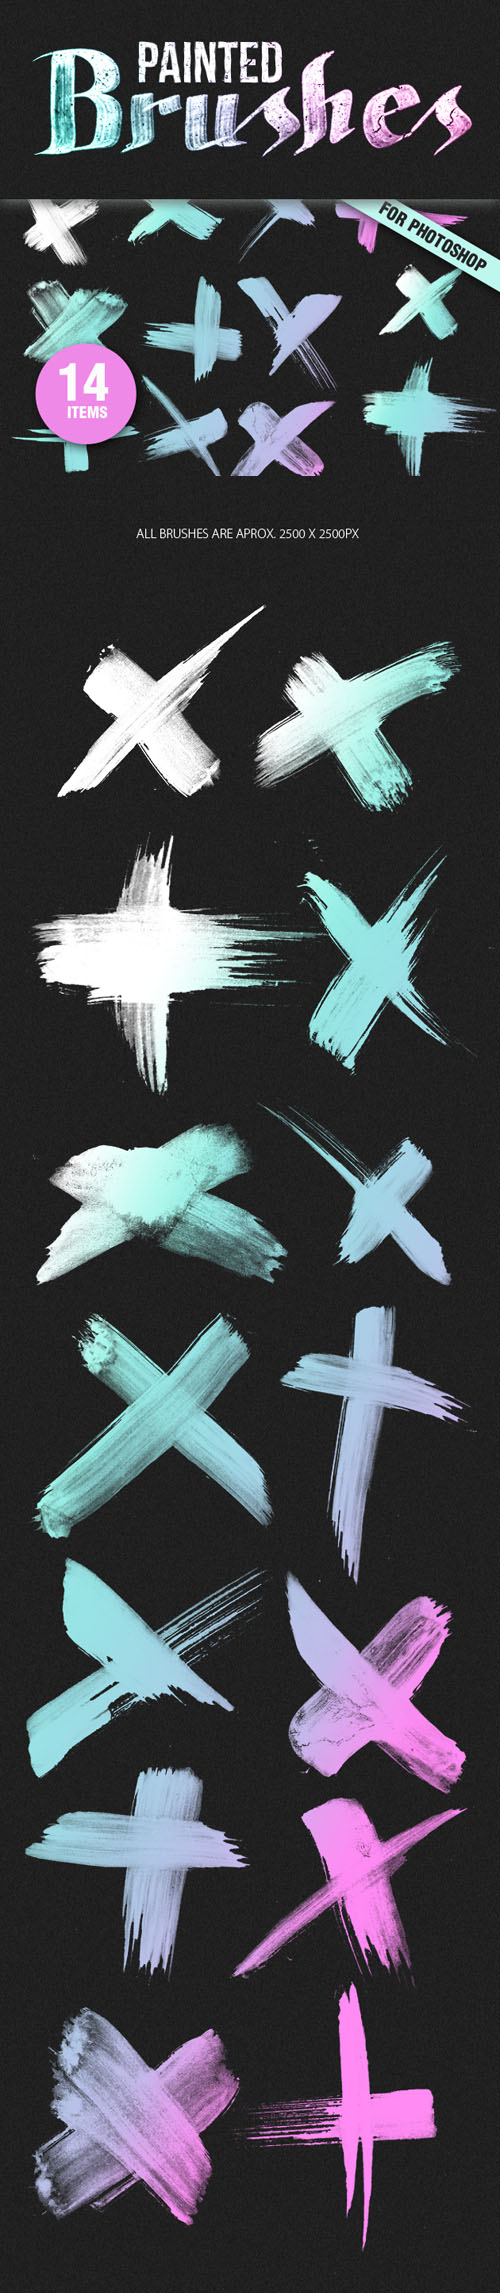 Designtnt - Painted Crosses PS Brushes